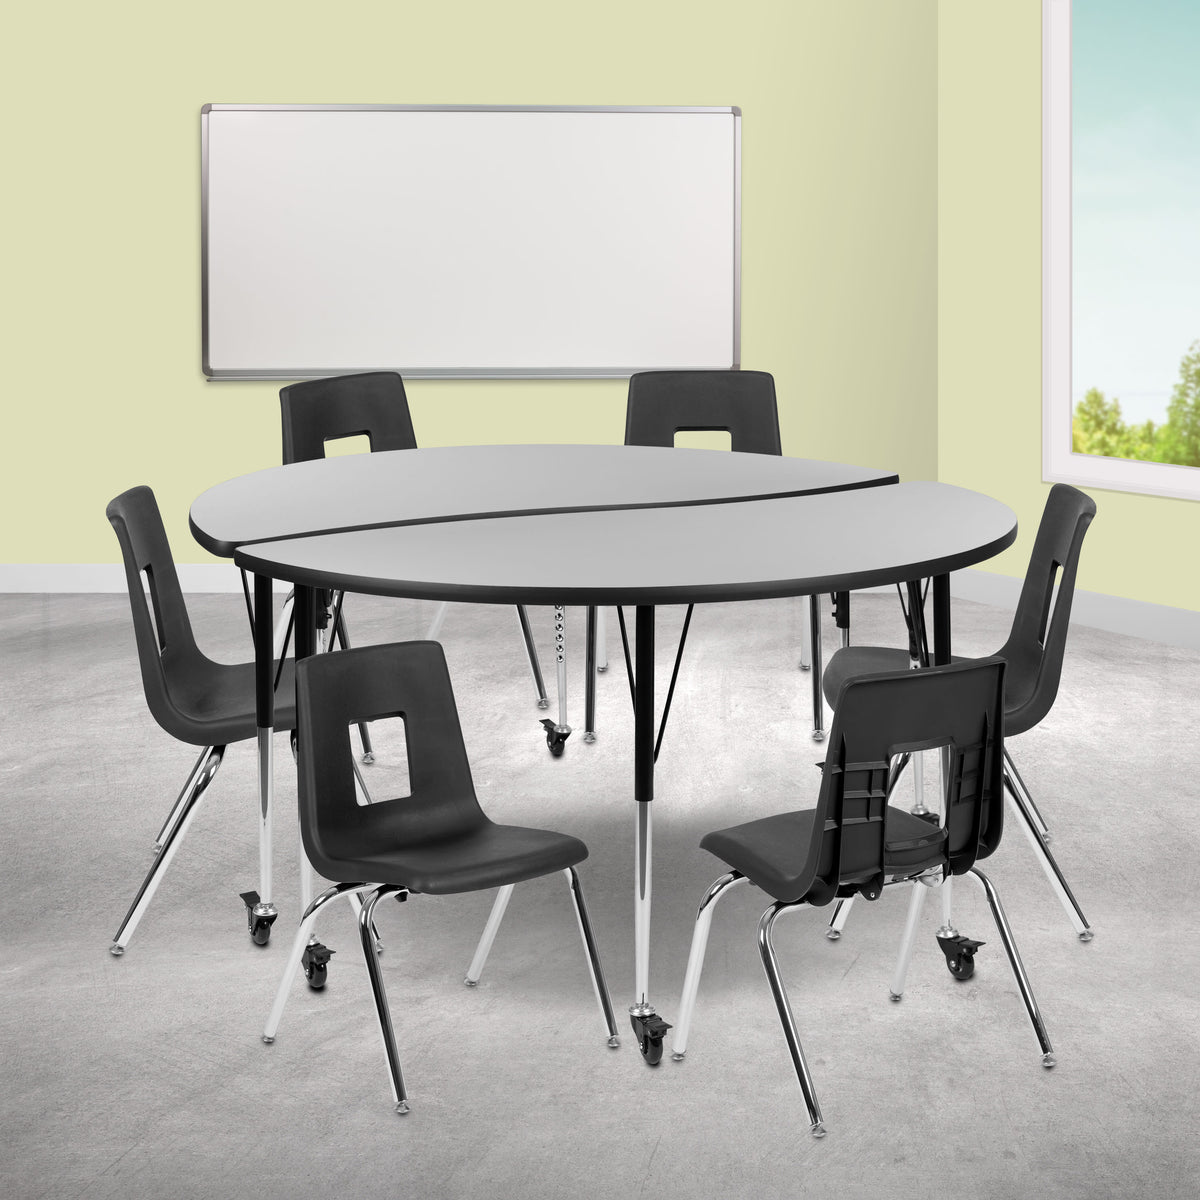 Grey |#| Mobile 60inch Circle Wave Activity Table Set-16inch Student Stack Chairs, Grey/Black